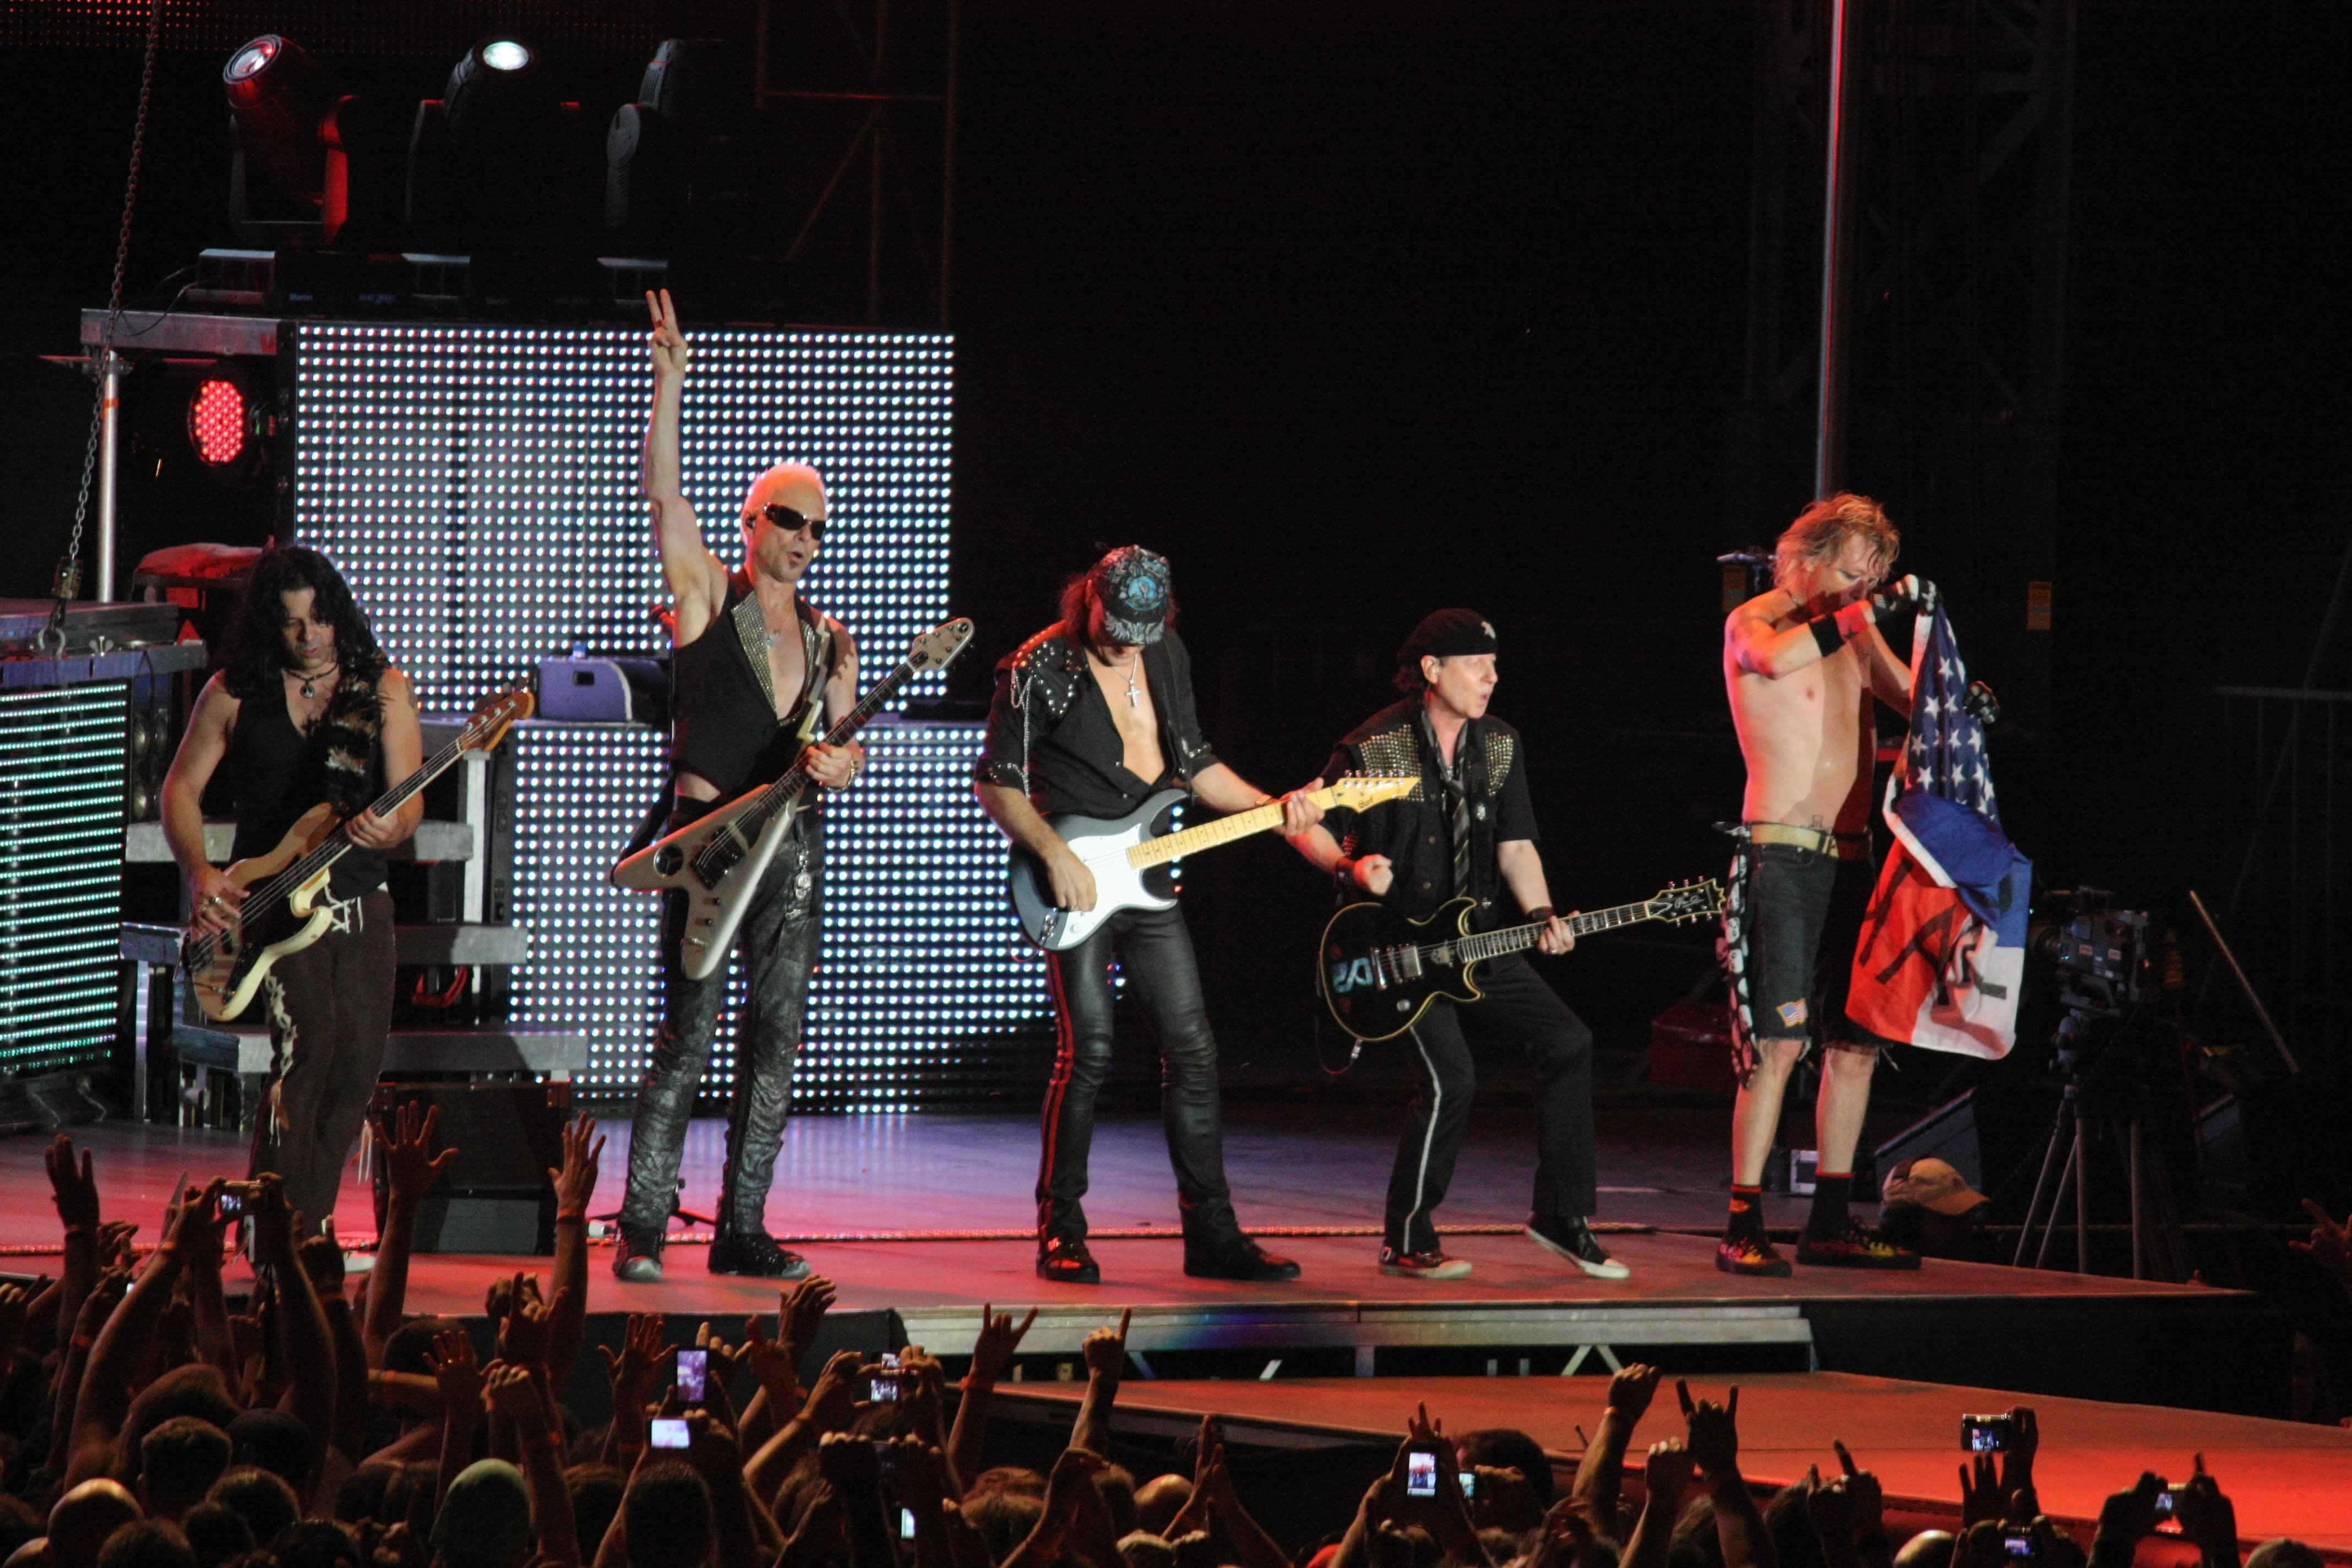 The Scorpions to Rock Beijing like a Hurricane August 14